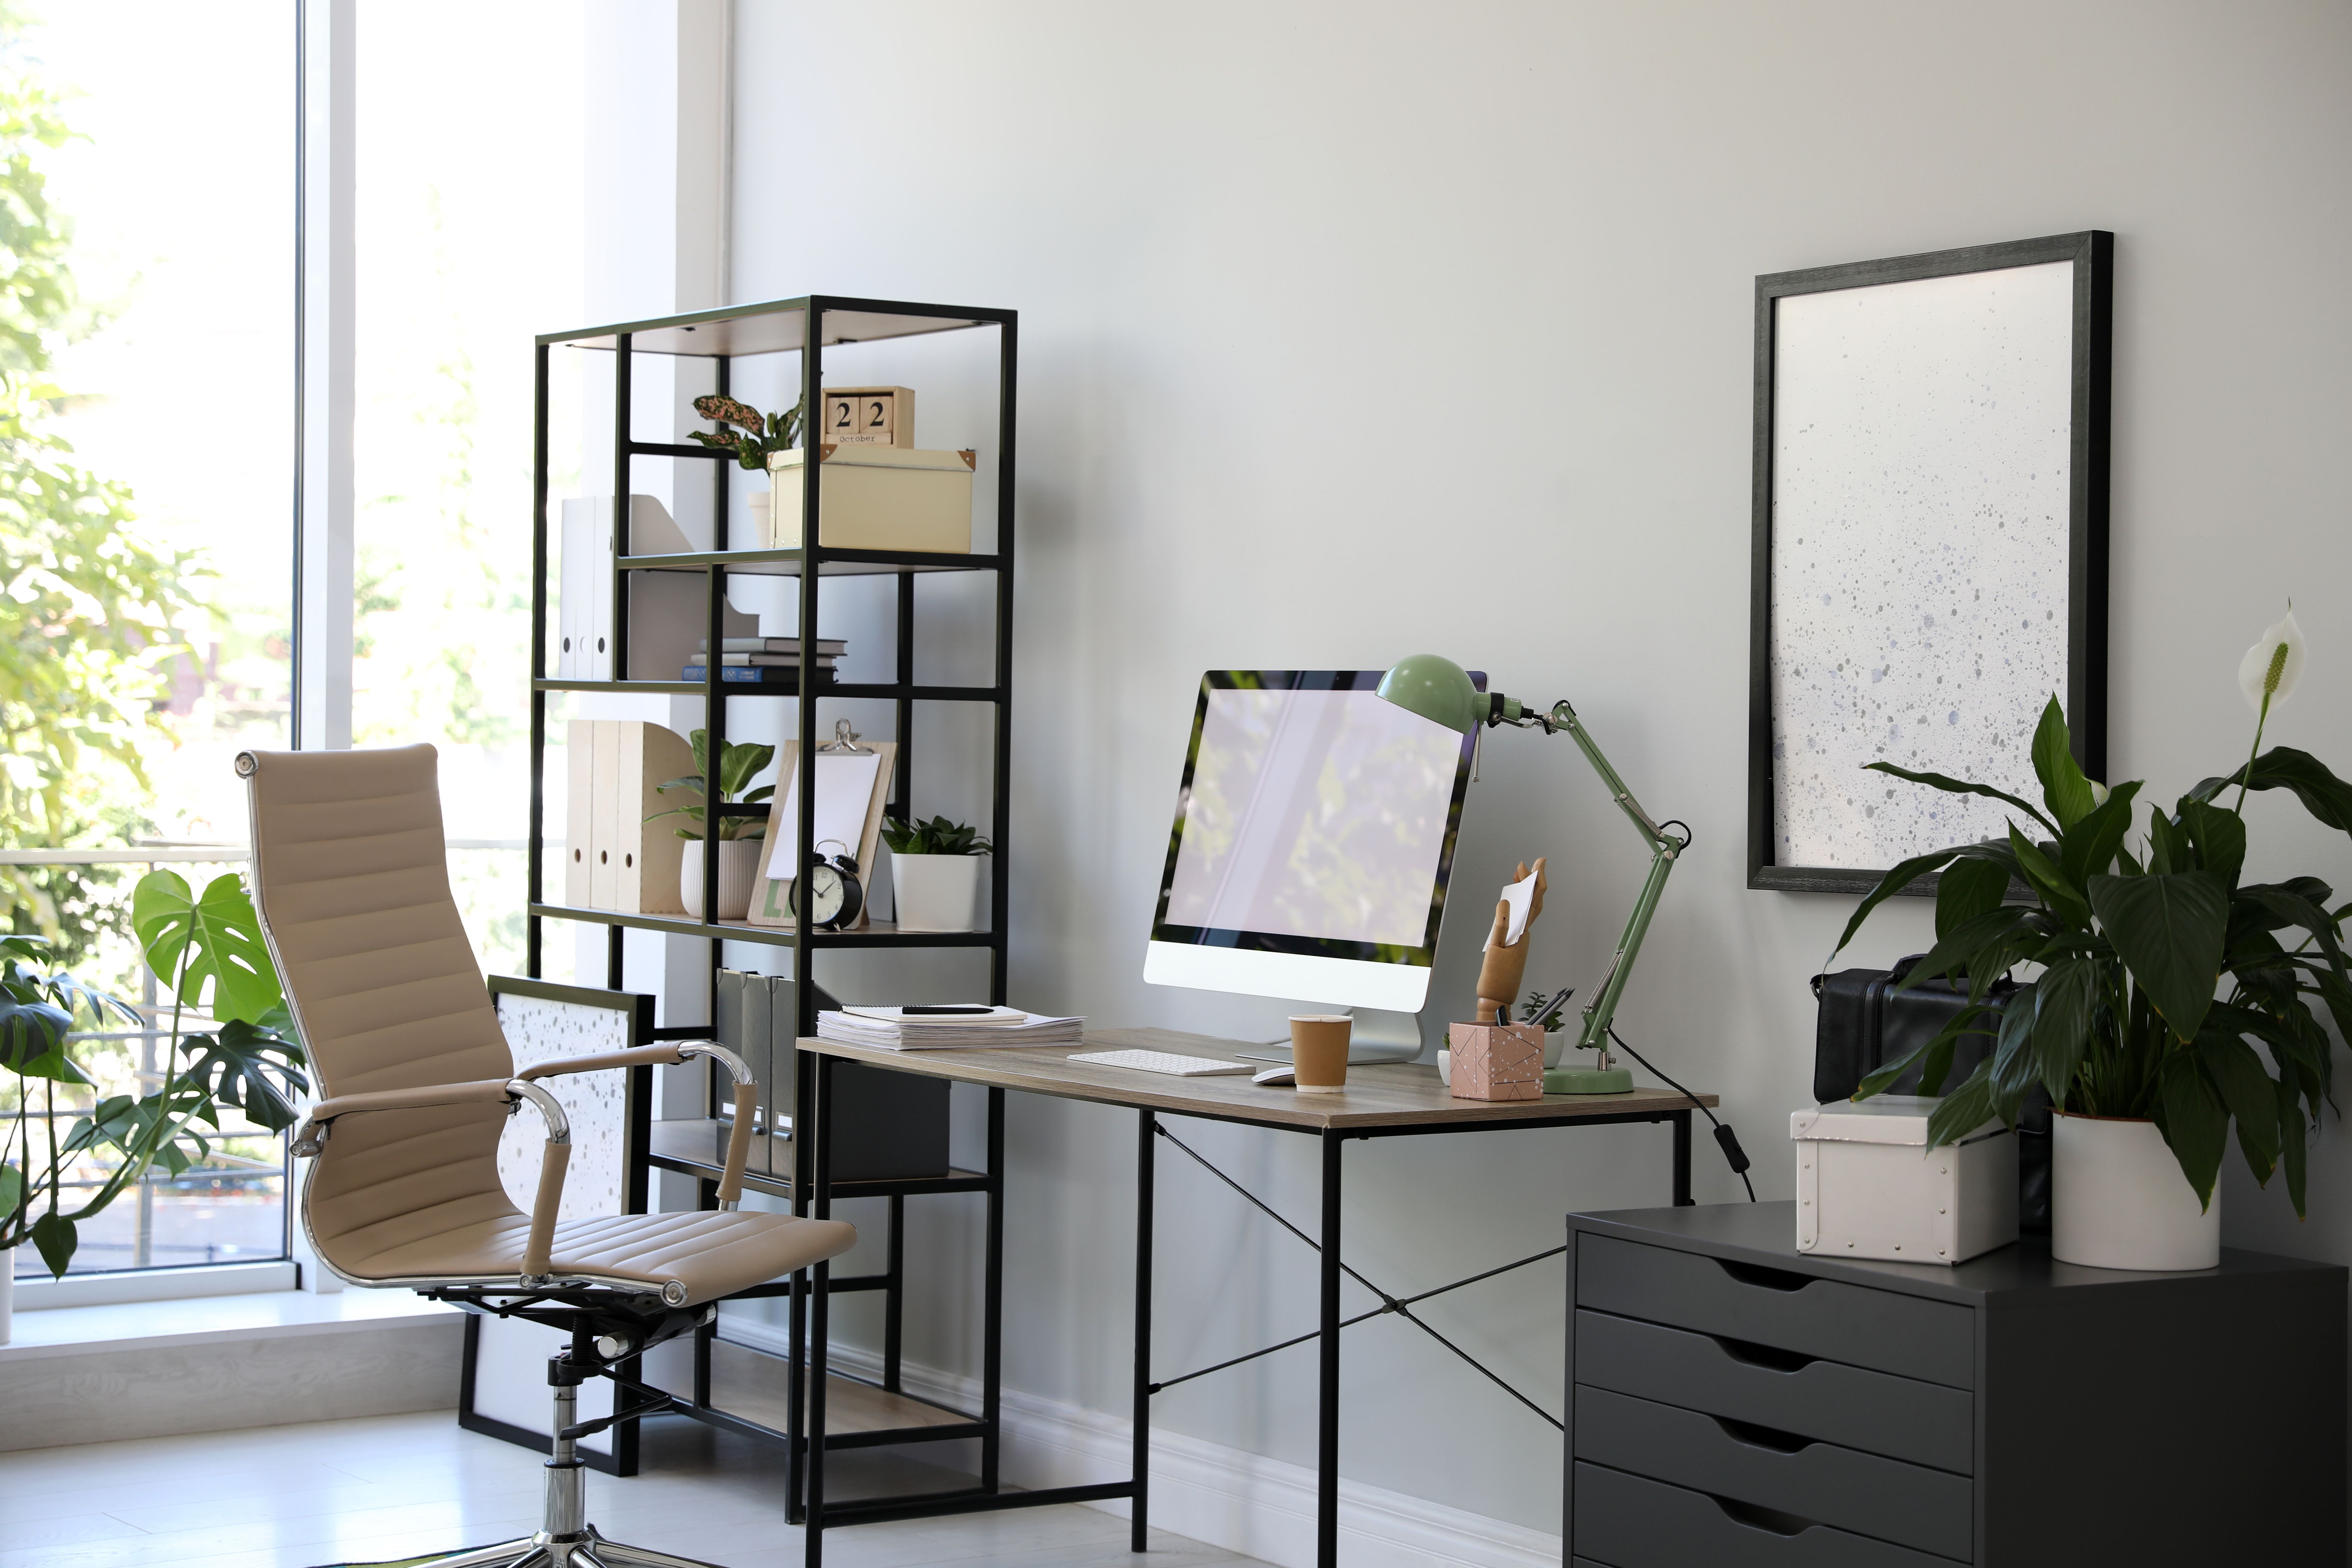 Classification of a Home Office